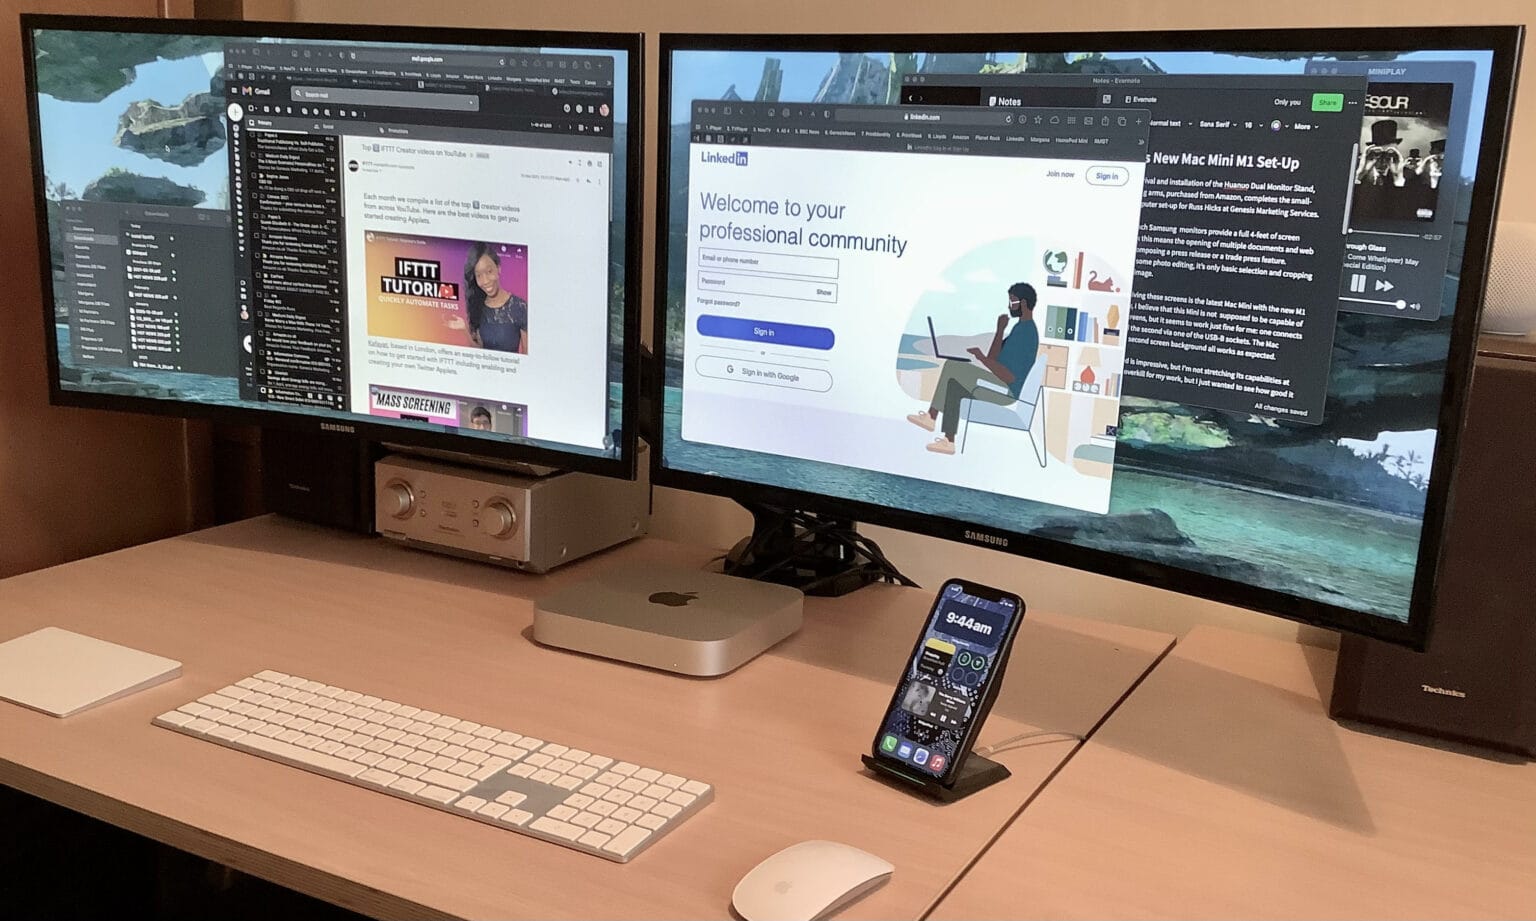 Dual curved displays and Apple keyboard, trackpad and mouse make the setup for Russ Hicks.